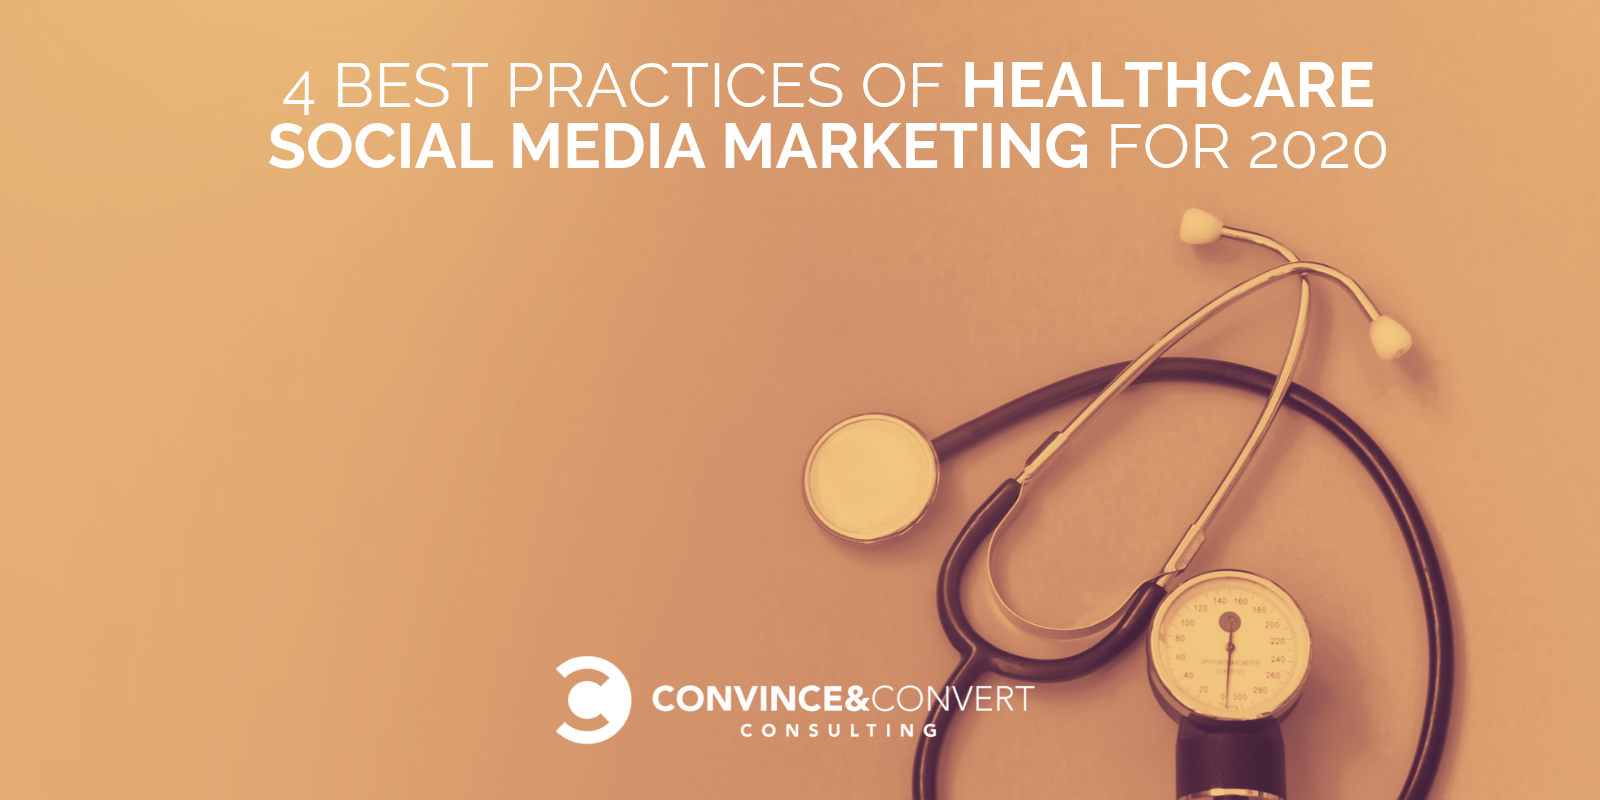 4 best practices of healthcare social media marketing for 2020